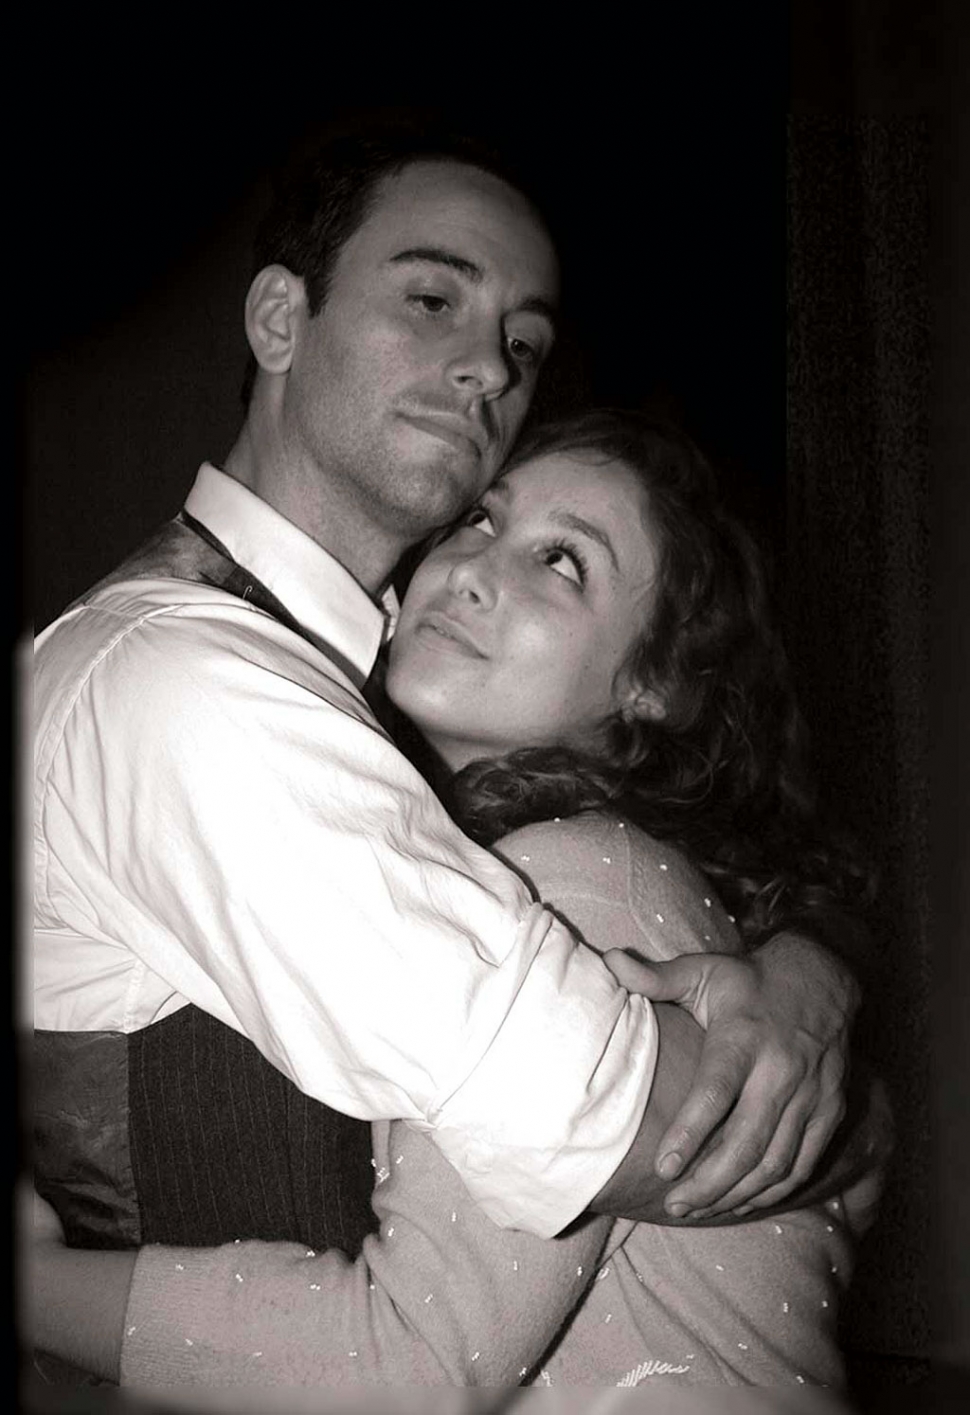 Georg (Geoffrey Helms) and Amalia (Danielle Protugal) are lovers at last in SHE LOVES ME.